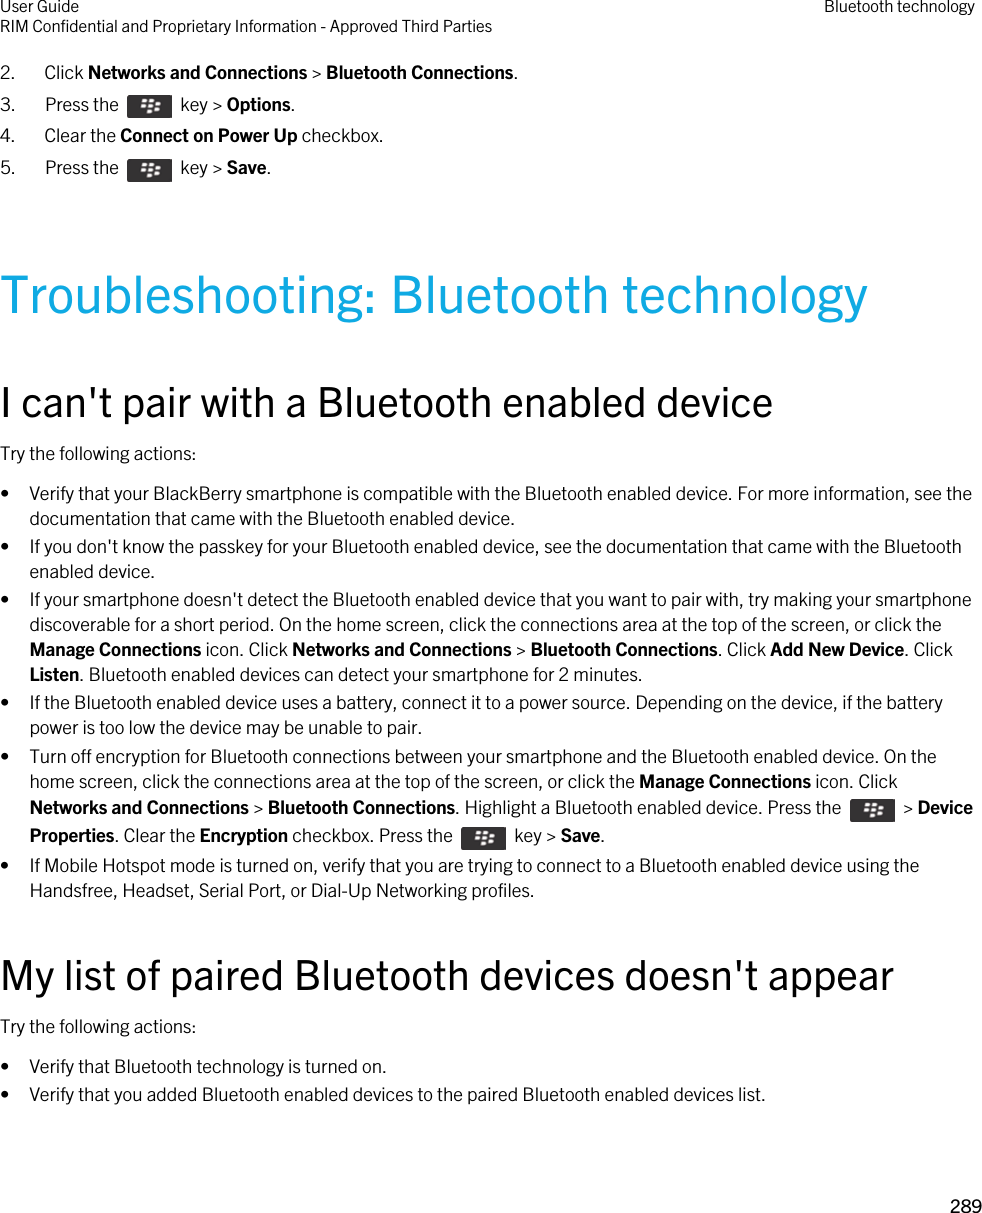 2. Click Networks and Connections &gt; Bluetooth Connections.3.  Press the    key &gt; Options. 4. Clear the Connect on Power Up checkbox.5.  Press the    key &gt; Save. Troubleshooting: Bluetooth technologyI can&apos;t pair with a Bluetooth enabled deviceTry the following actions:• Verify that your BlackBerry smartphone is compatible with the Bluetooth enabled device. For more information, see the documentation that came with the Bluetooth enabled device.• If you don&apos;t know the passkey for your Bluetooth enabled device, see the documentation that came with the Bluetooth enabled device.• If your smartphone doesn&apos;t detect the Bluetooth enabled device that you want to pair with, try making your smartphone discoverable for a short period. On the home screen, click the connections area at the top of the screen, or click the Manage Connections icon. Click Networks and Connections &gt; Bluetooth Connections. Click Add New Device. Click Listen. Bluetooth enabled devices can detect your smartphone for 2 minutes.• If the Bluetooth enabled device uses a battery, connect it to a power source. Depending on the device, if the battery power is too low the device may be unable to pair.• Turn off encryption for Bluetooth connections between your smartphone and the Bluetooth enabled device. On the home screen, click the connections area at the top of the screen, or click the Manage Connections icon. Click Networks and Connections &gt; Bluetooth Connections. Highlight a Bluetooth enabled device. Press the    &gt; Device Properties. Clear the Encryption checkbox. Press the    key &gt; Save.• If Mobile Hotspot mode is turned on, verify that you are trying to connect to a Bluetooth enabled device using the Handsfree, Headset, Serial Port, or Dial-Up Networking profiles.My list of paired Bluetooth devices doesn&apos;t appearTry the following actions:• Verify that Bluetooth technology is turned on.• Verify that you added Bluetooth enabled devices to the paired Bluetooth enabled devices list.User GuideRIM Confidential and Proprietary Information - Approved Third Parties Bluetooth technology289 